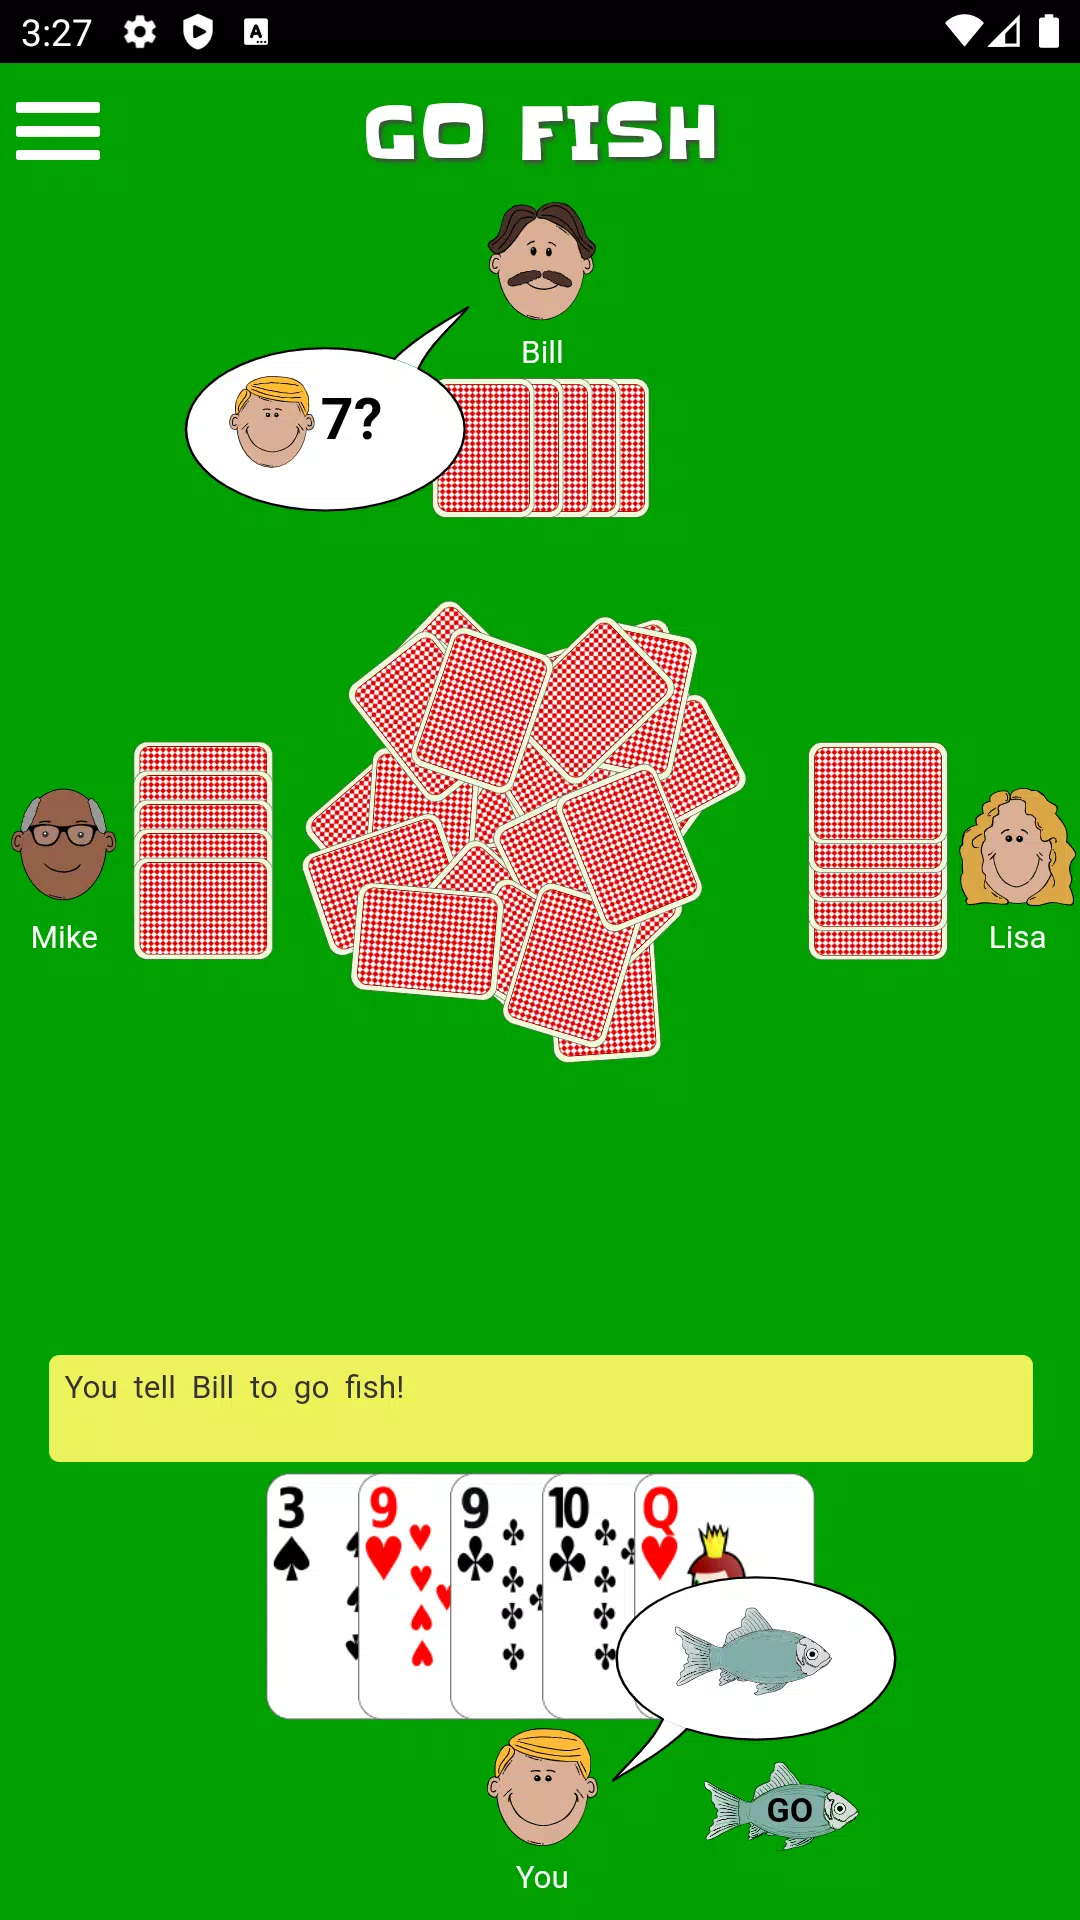 CardGames.io APK for Android Download